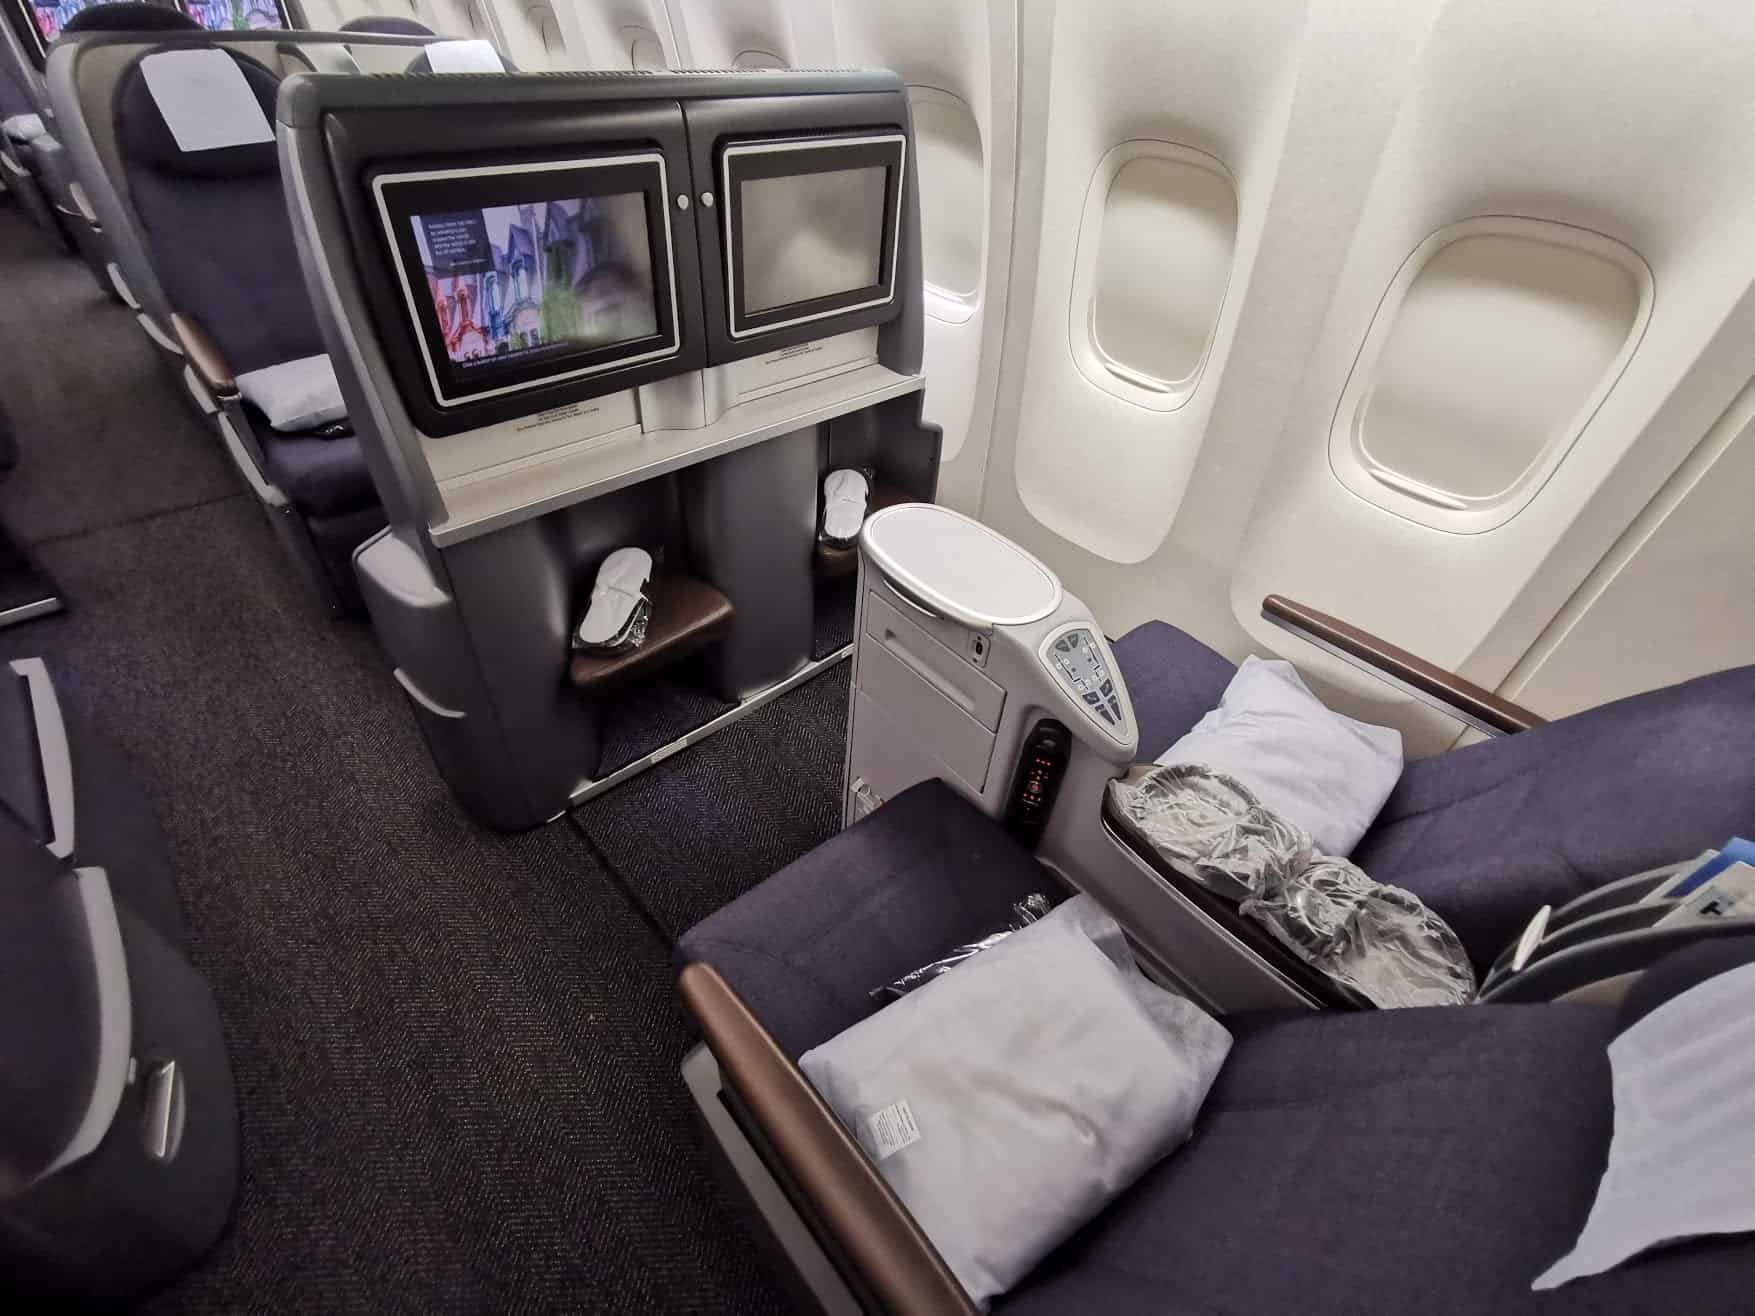 The Best Business Class? We Compared 50 Airlines » Travel-Dealz.com